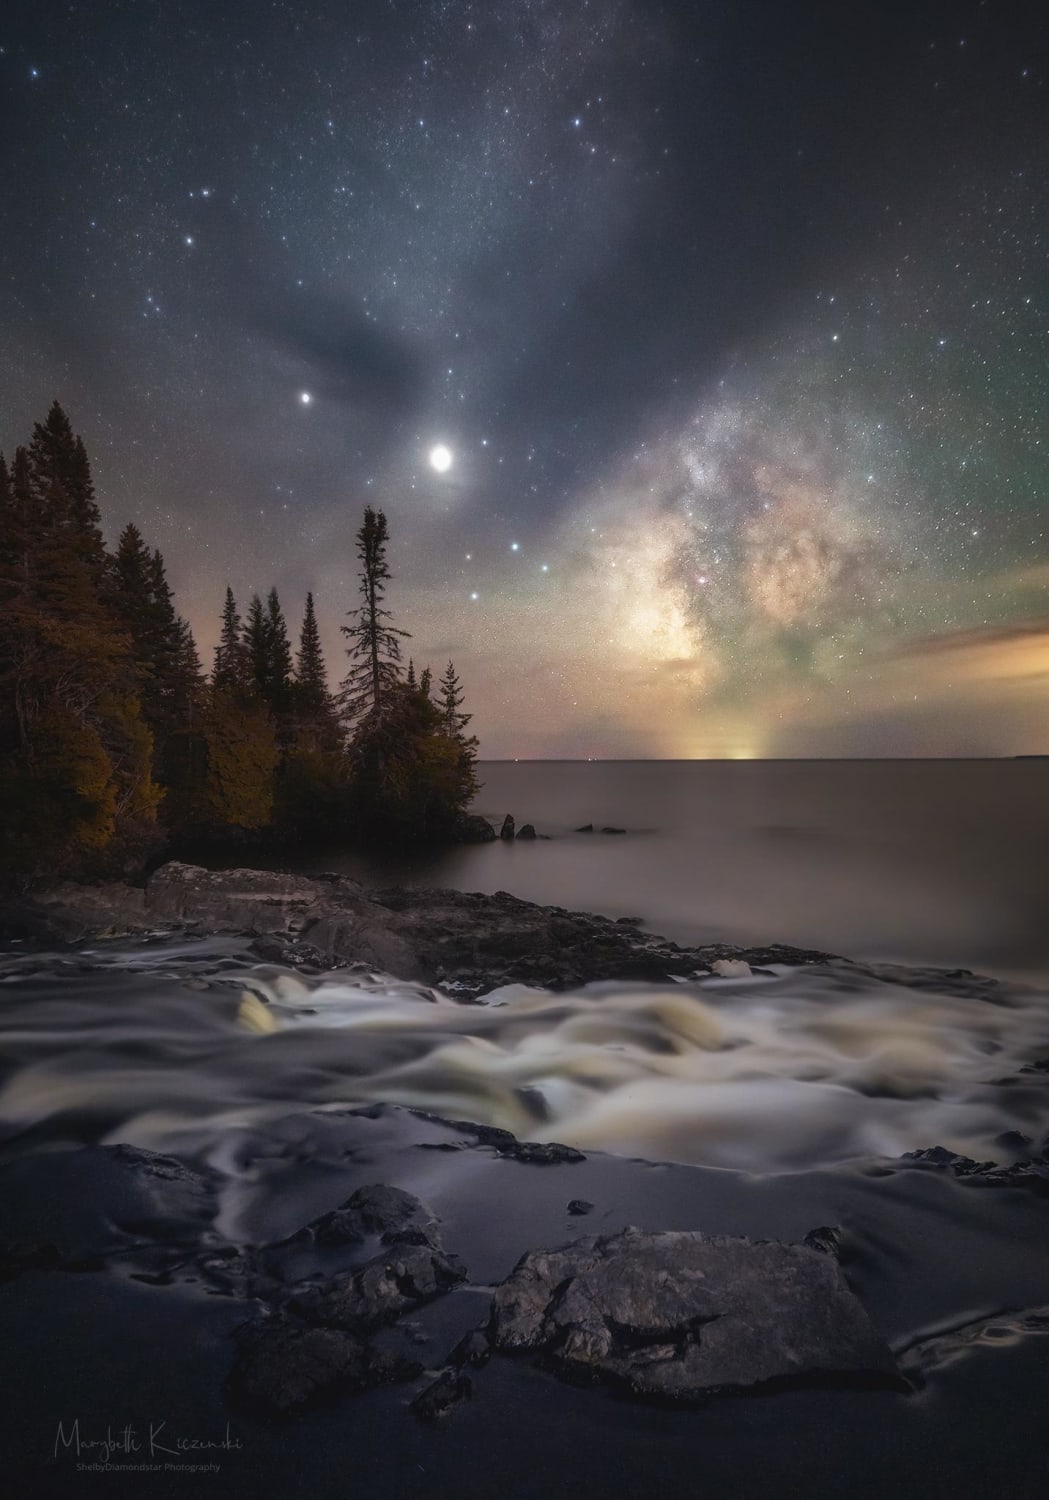 Milky Way and clouds creating a dreamy view of this waterfall at the edge of Lake Superior - Northern Michigan, USA.